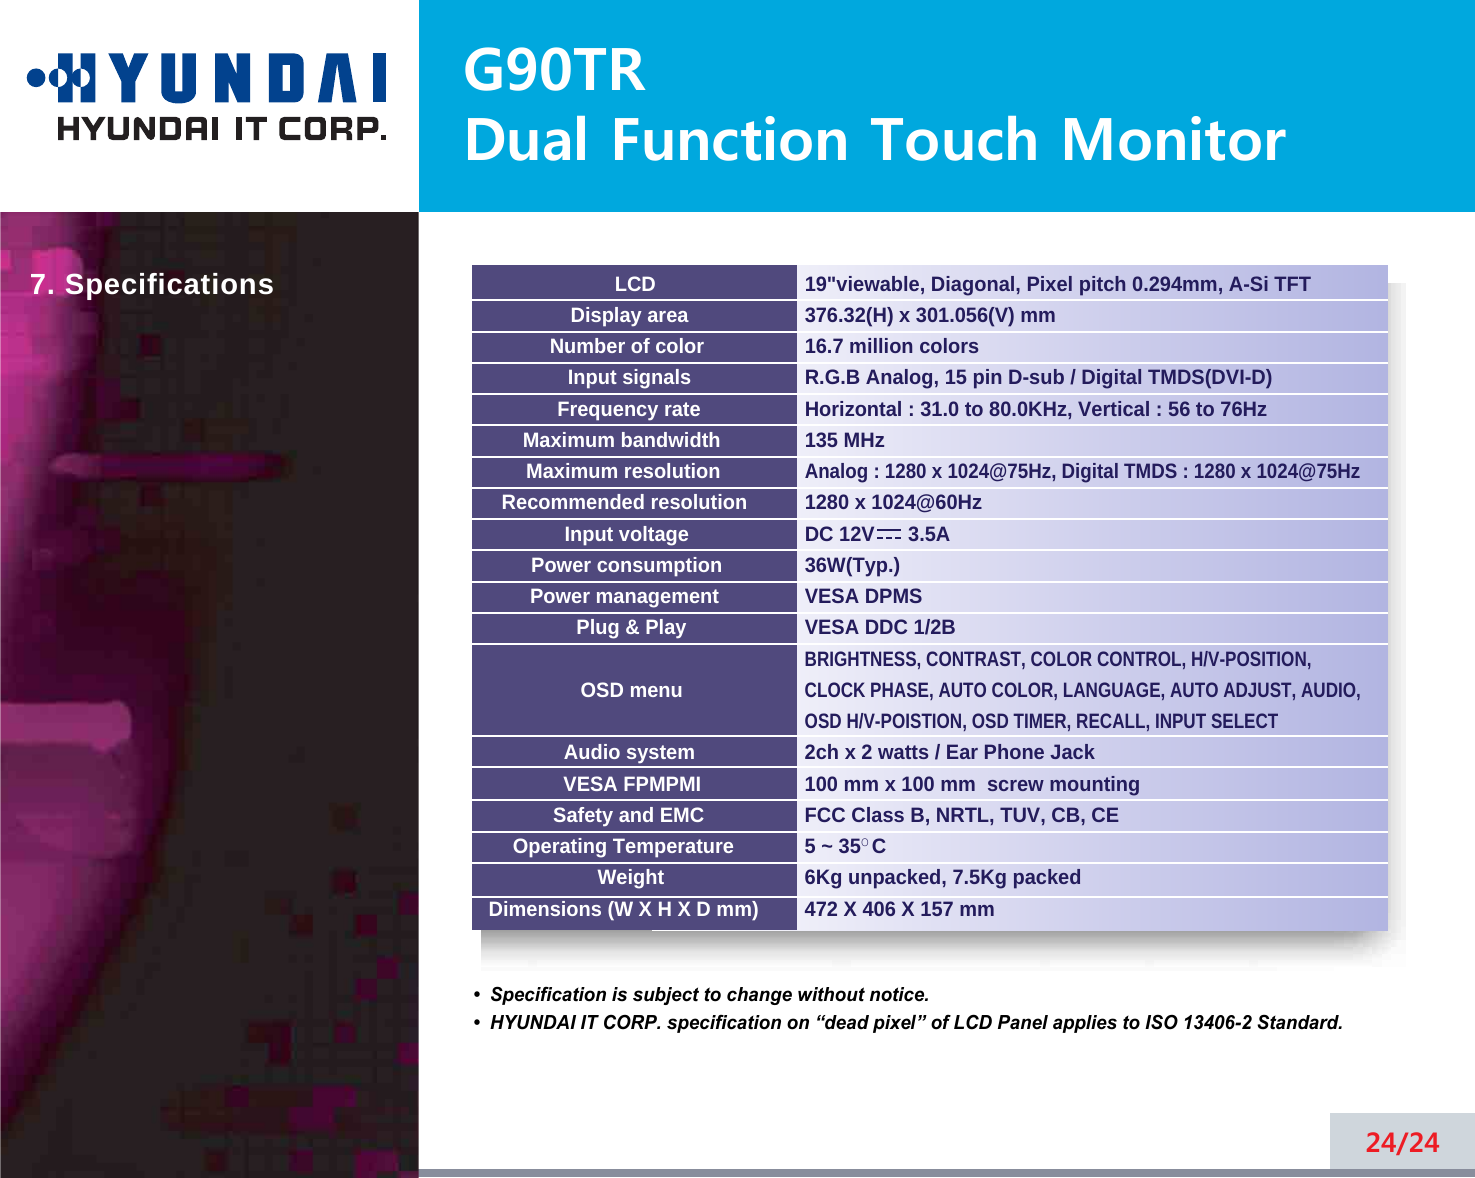 G90TRDual Function Touch Monitor24/24LCDDisplay areaNumber of colorInput signalsFrequency rateMaximum bandwidthMaximum resolutionRecommended resolutionInput voltagePower consumptionPower managementPlug &amp; PlayOSD menuAudio systemVESA FPMPMISafety and EMCOperating TemperatureWeightDimensions (W X H X D mm)•  Specification is subject to change without notice.•  HYUNDAI IT CORP. specification on “dead pixel” of LCD Panel applies to ISO 13406-2 Standard.7. Specifications19&quot;viewable, Diagonal, Pixel pitch 0.294mm, A-Si TFT376.32(H) x 301.056(V) mm16.7 million colorsR.G.B Analog, 15 pin D-sub / Digital TMDS(DVI-D)Horizontal : 31.0 to 80.0KHz, Vertical : 56 to 76Hz135 MHzAnalog : 1280 x 1024@75Hz, Digital TMDS : 1280 x 1024@75Hz1280 x 1024@60HzDC 12V      3.5A 36W(Typ.)VESA DPMSVESA DDC 1/2BBRIGHTNESS, CONTRAST, COLOR CONTROL, H/V-POSITION, CLOCK PHASE, AUTO COLOR, LANGUAGE, AUTO ADJUST, AUDIO,   OSD H/V-POISTION, OSD TIMER, RECALL, INPUT SELECT2ch x 2 watts / Ear Phone Jack100 mm x 100 mm  screw mountingFCC Class B, NRTL, TUV, CB, CE5 ~ 35O C6Kg unpacked, 7.5Kg packed472 X 406 X 157 mm